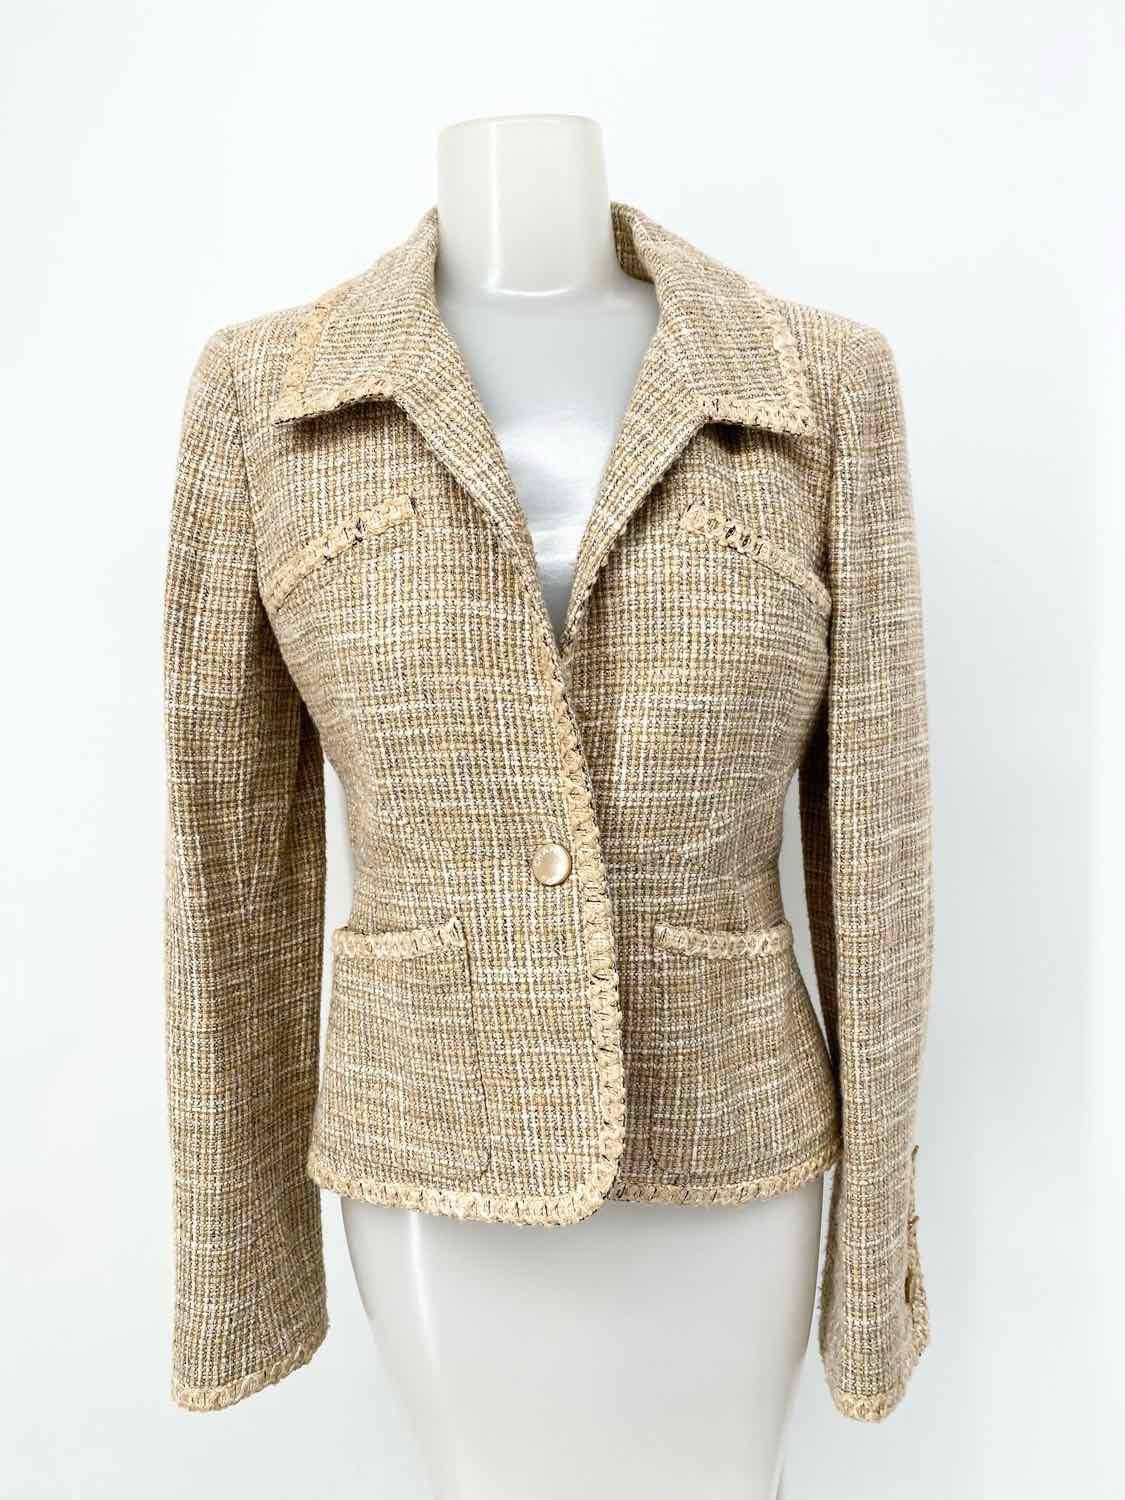 Chanel - Authenticated Jacket - Linen Beige for Women, Very Good Condition